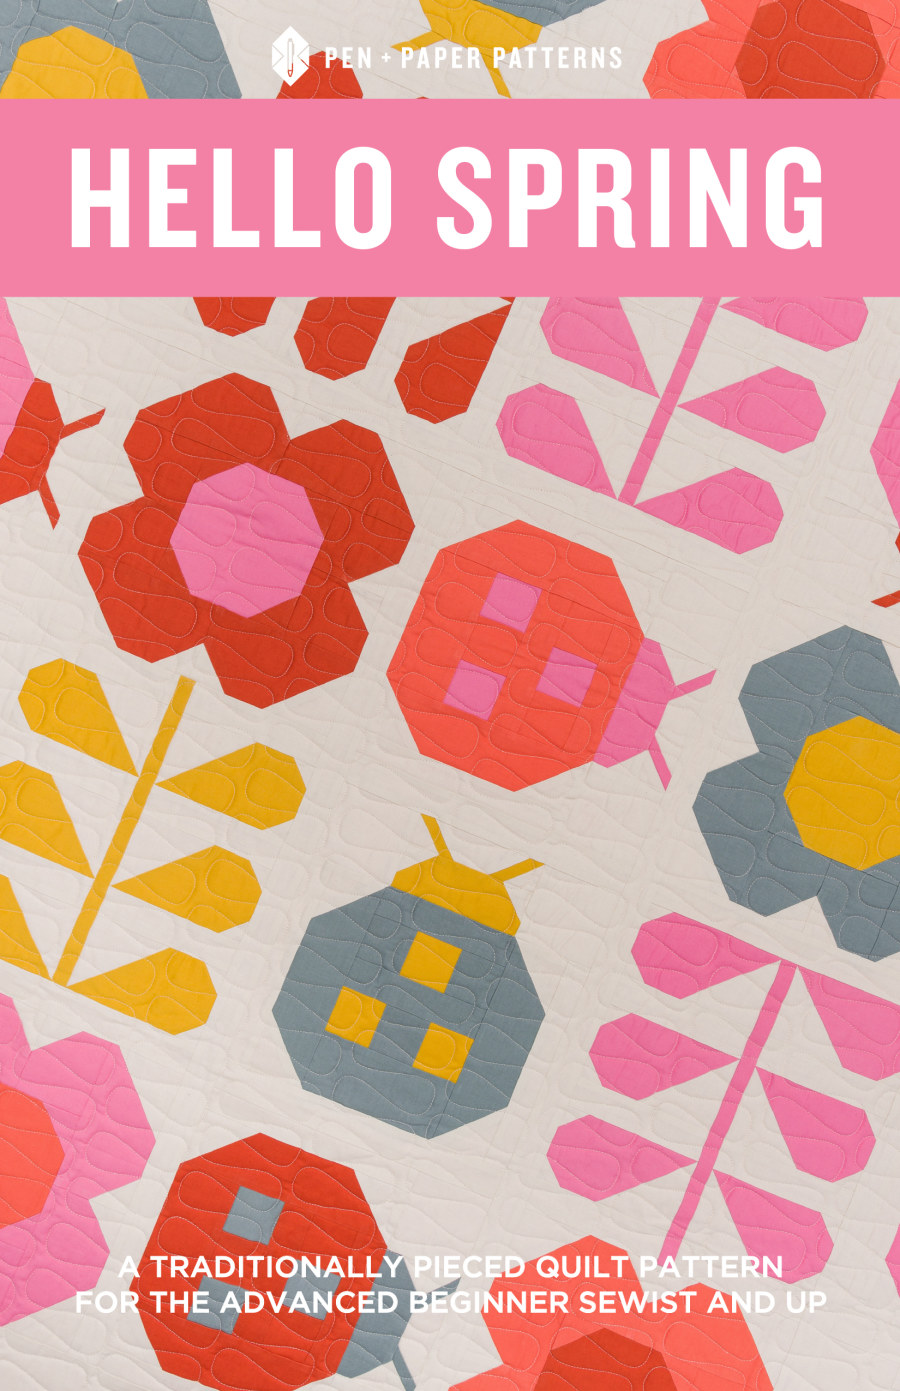 Hello Spring Quilt Pattern by Pen + Paper